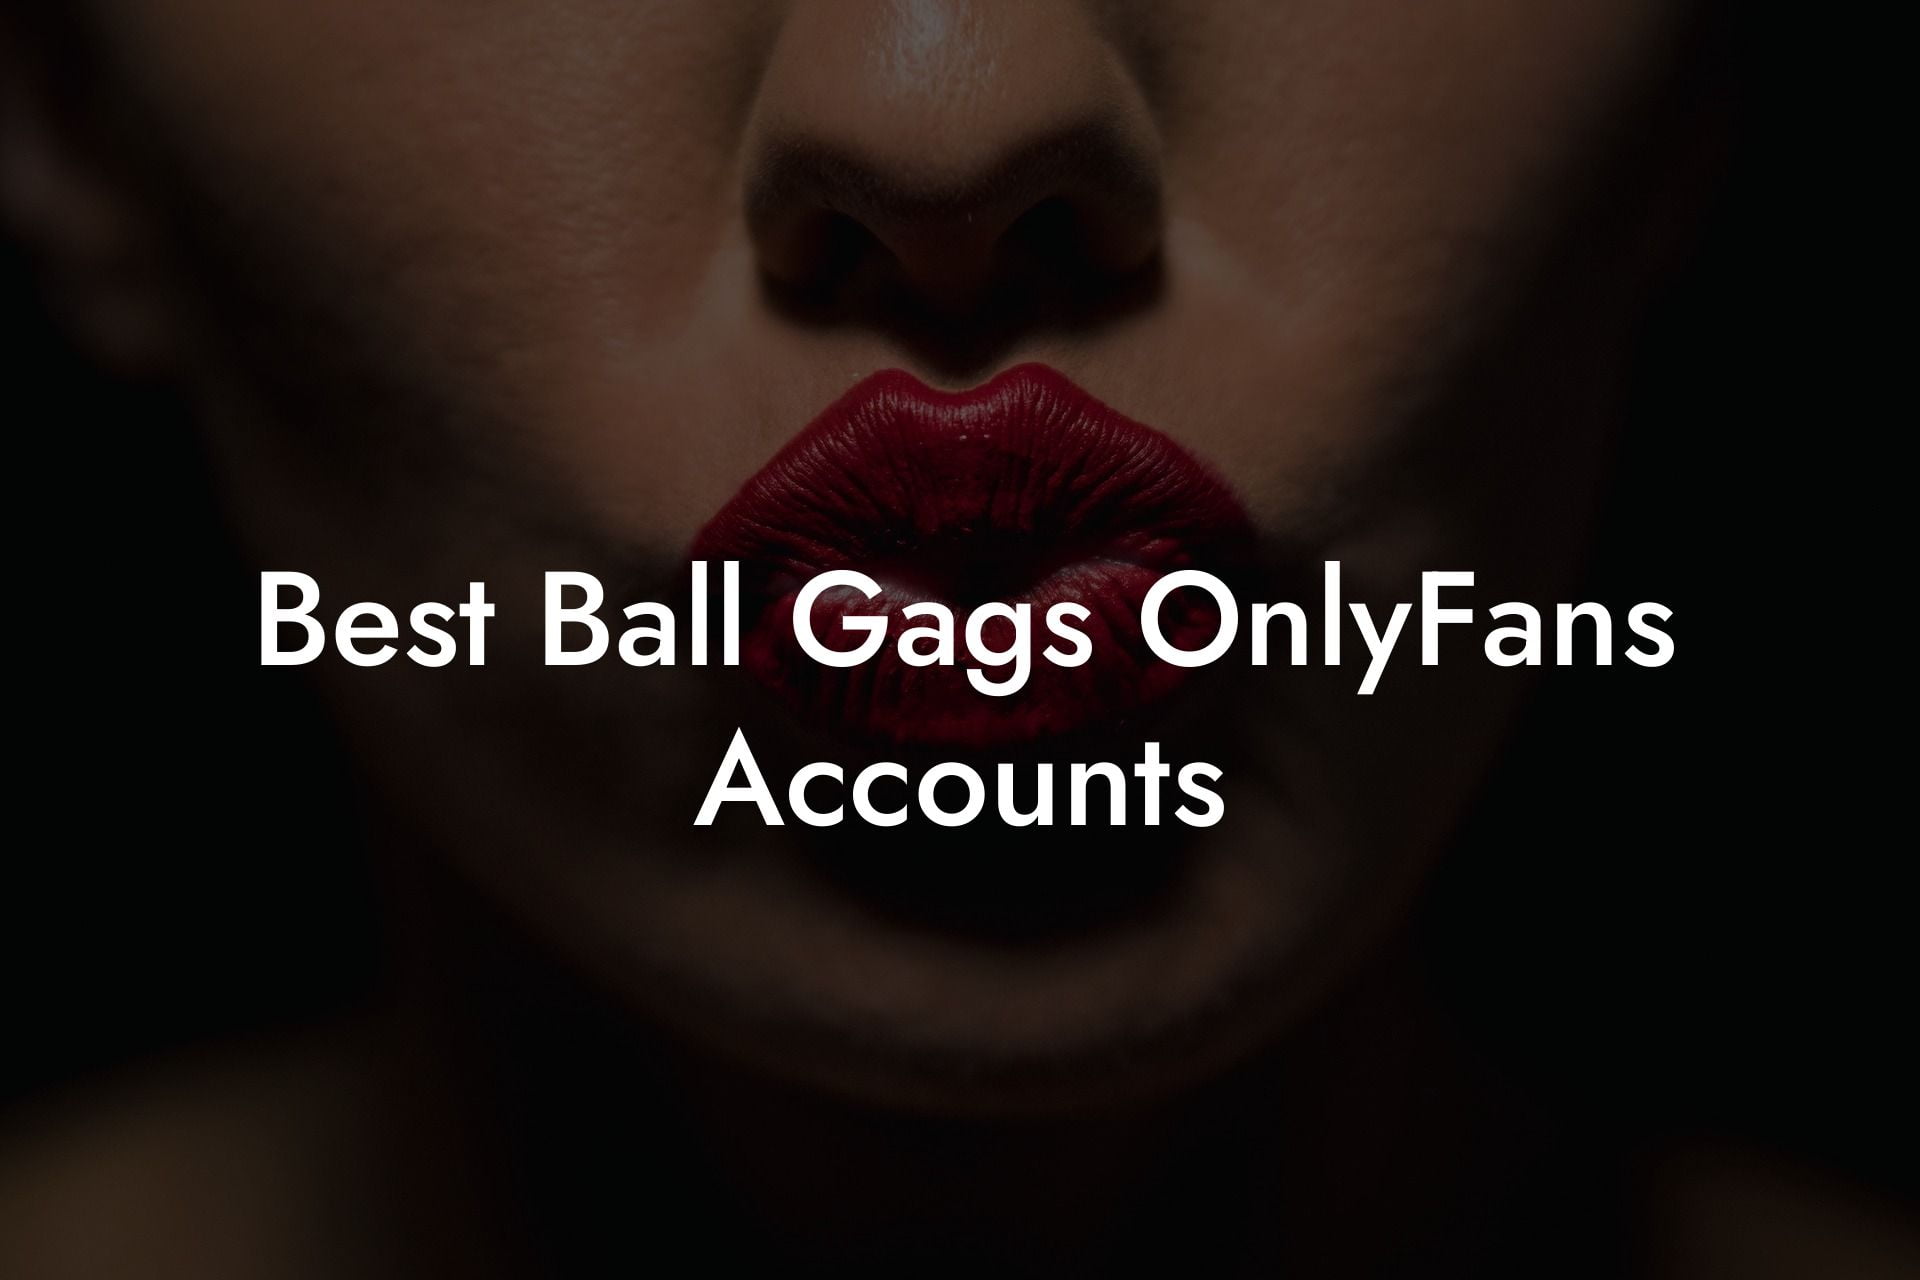 Best Ball Gags OnlyFans Accounts